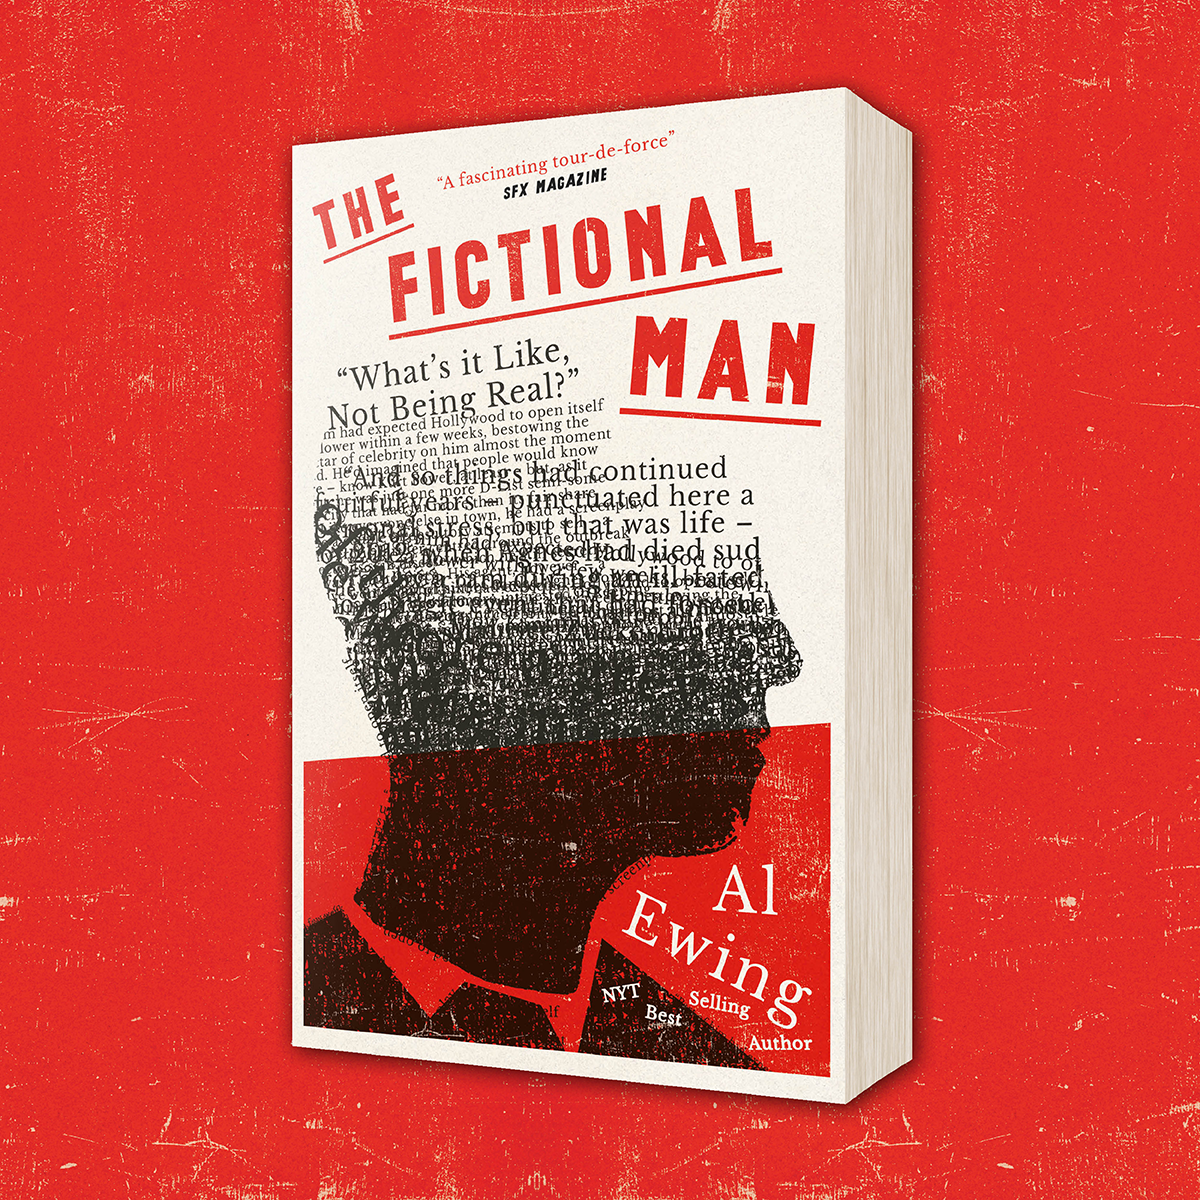 Image of The Fictional Man front cover